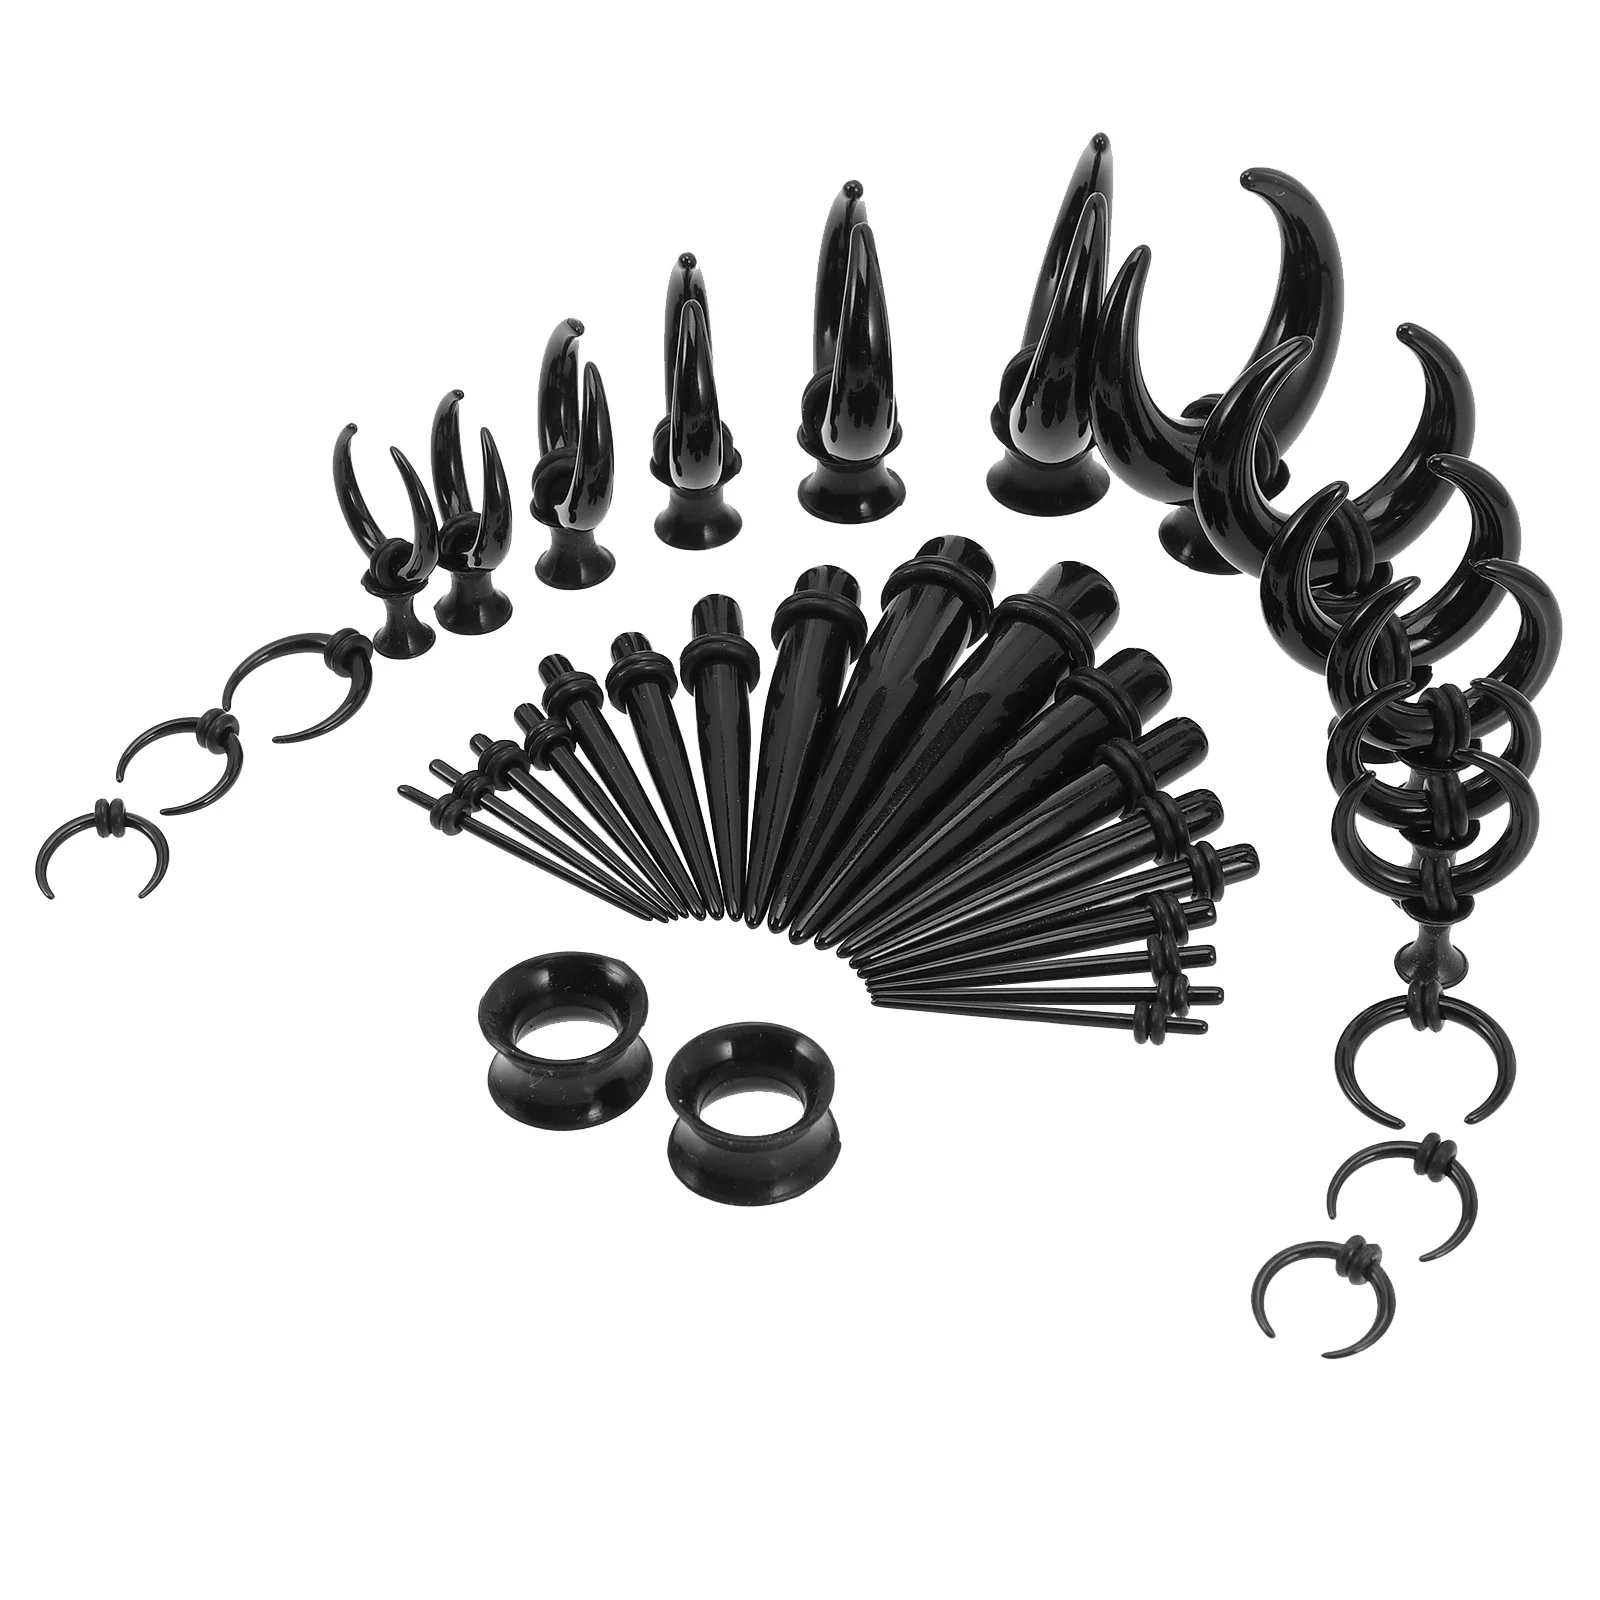 

50 Pcs Pointed Ears Extended Horns Gauge Jewelry Hip Hop Earrings Gauges Stretching Kit